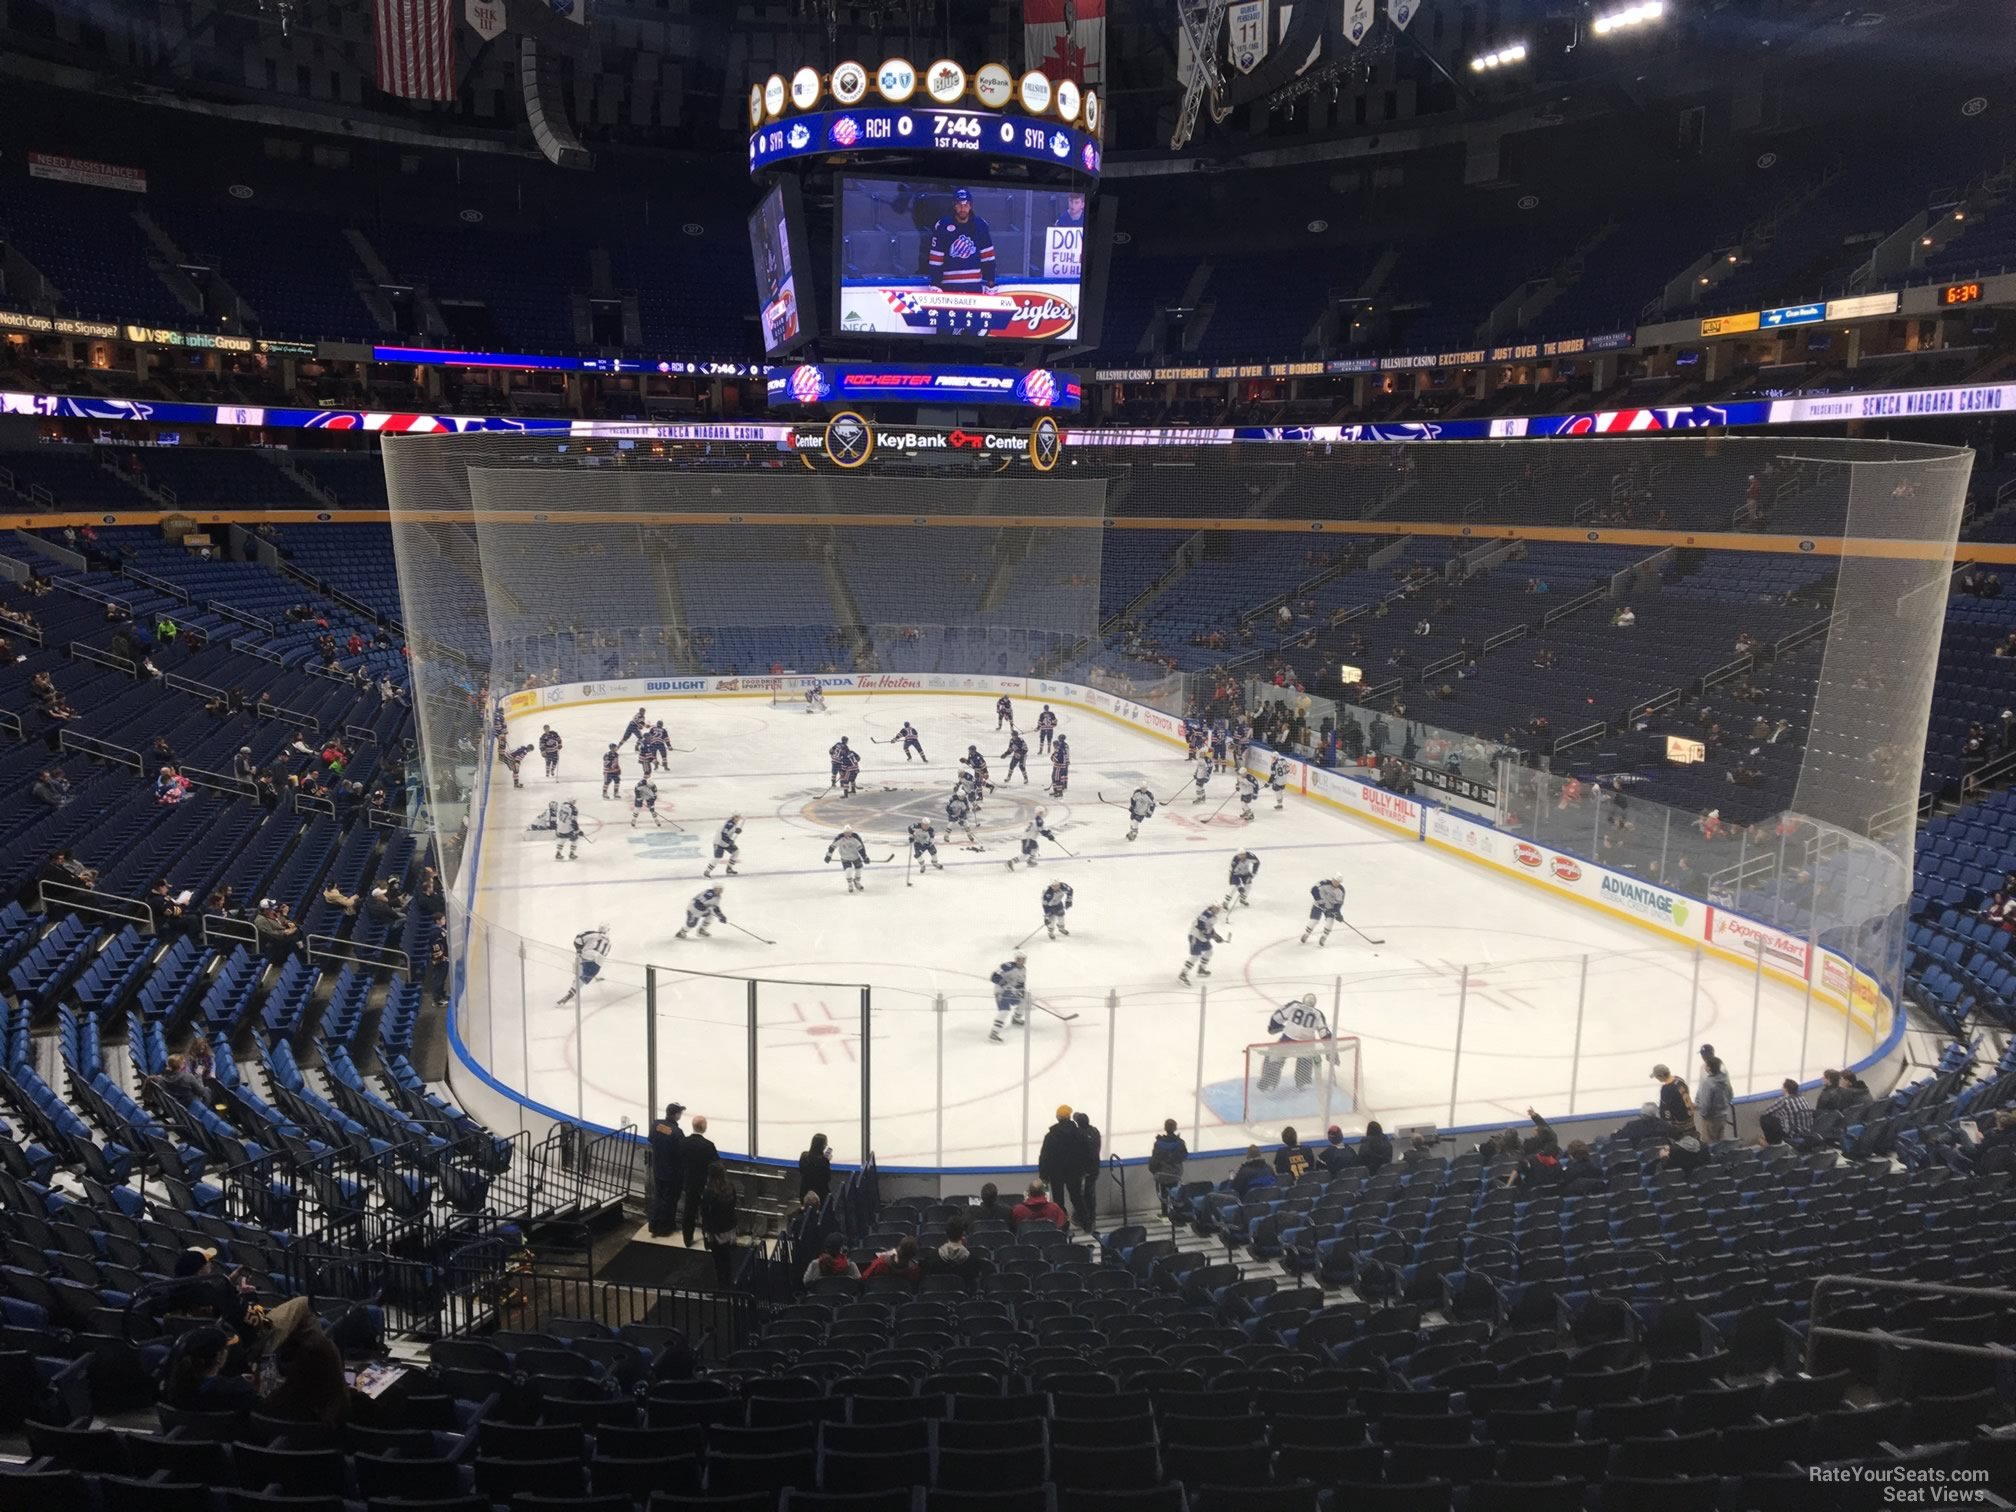 section 112, row 22 seat view  for hockey - keybank center